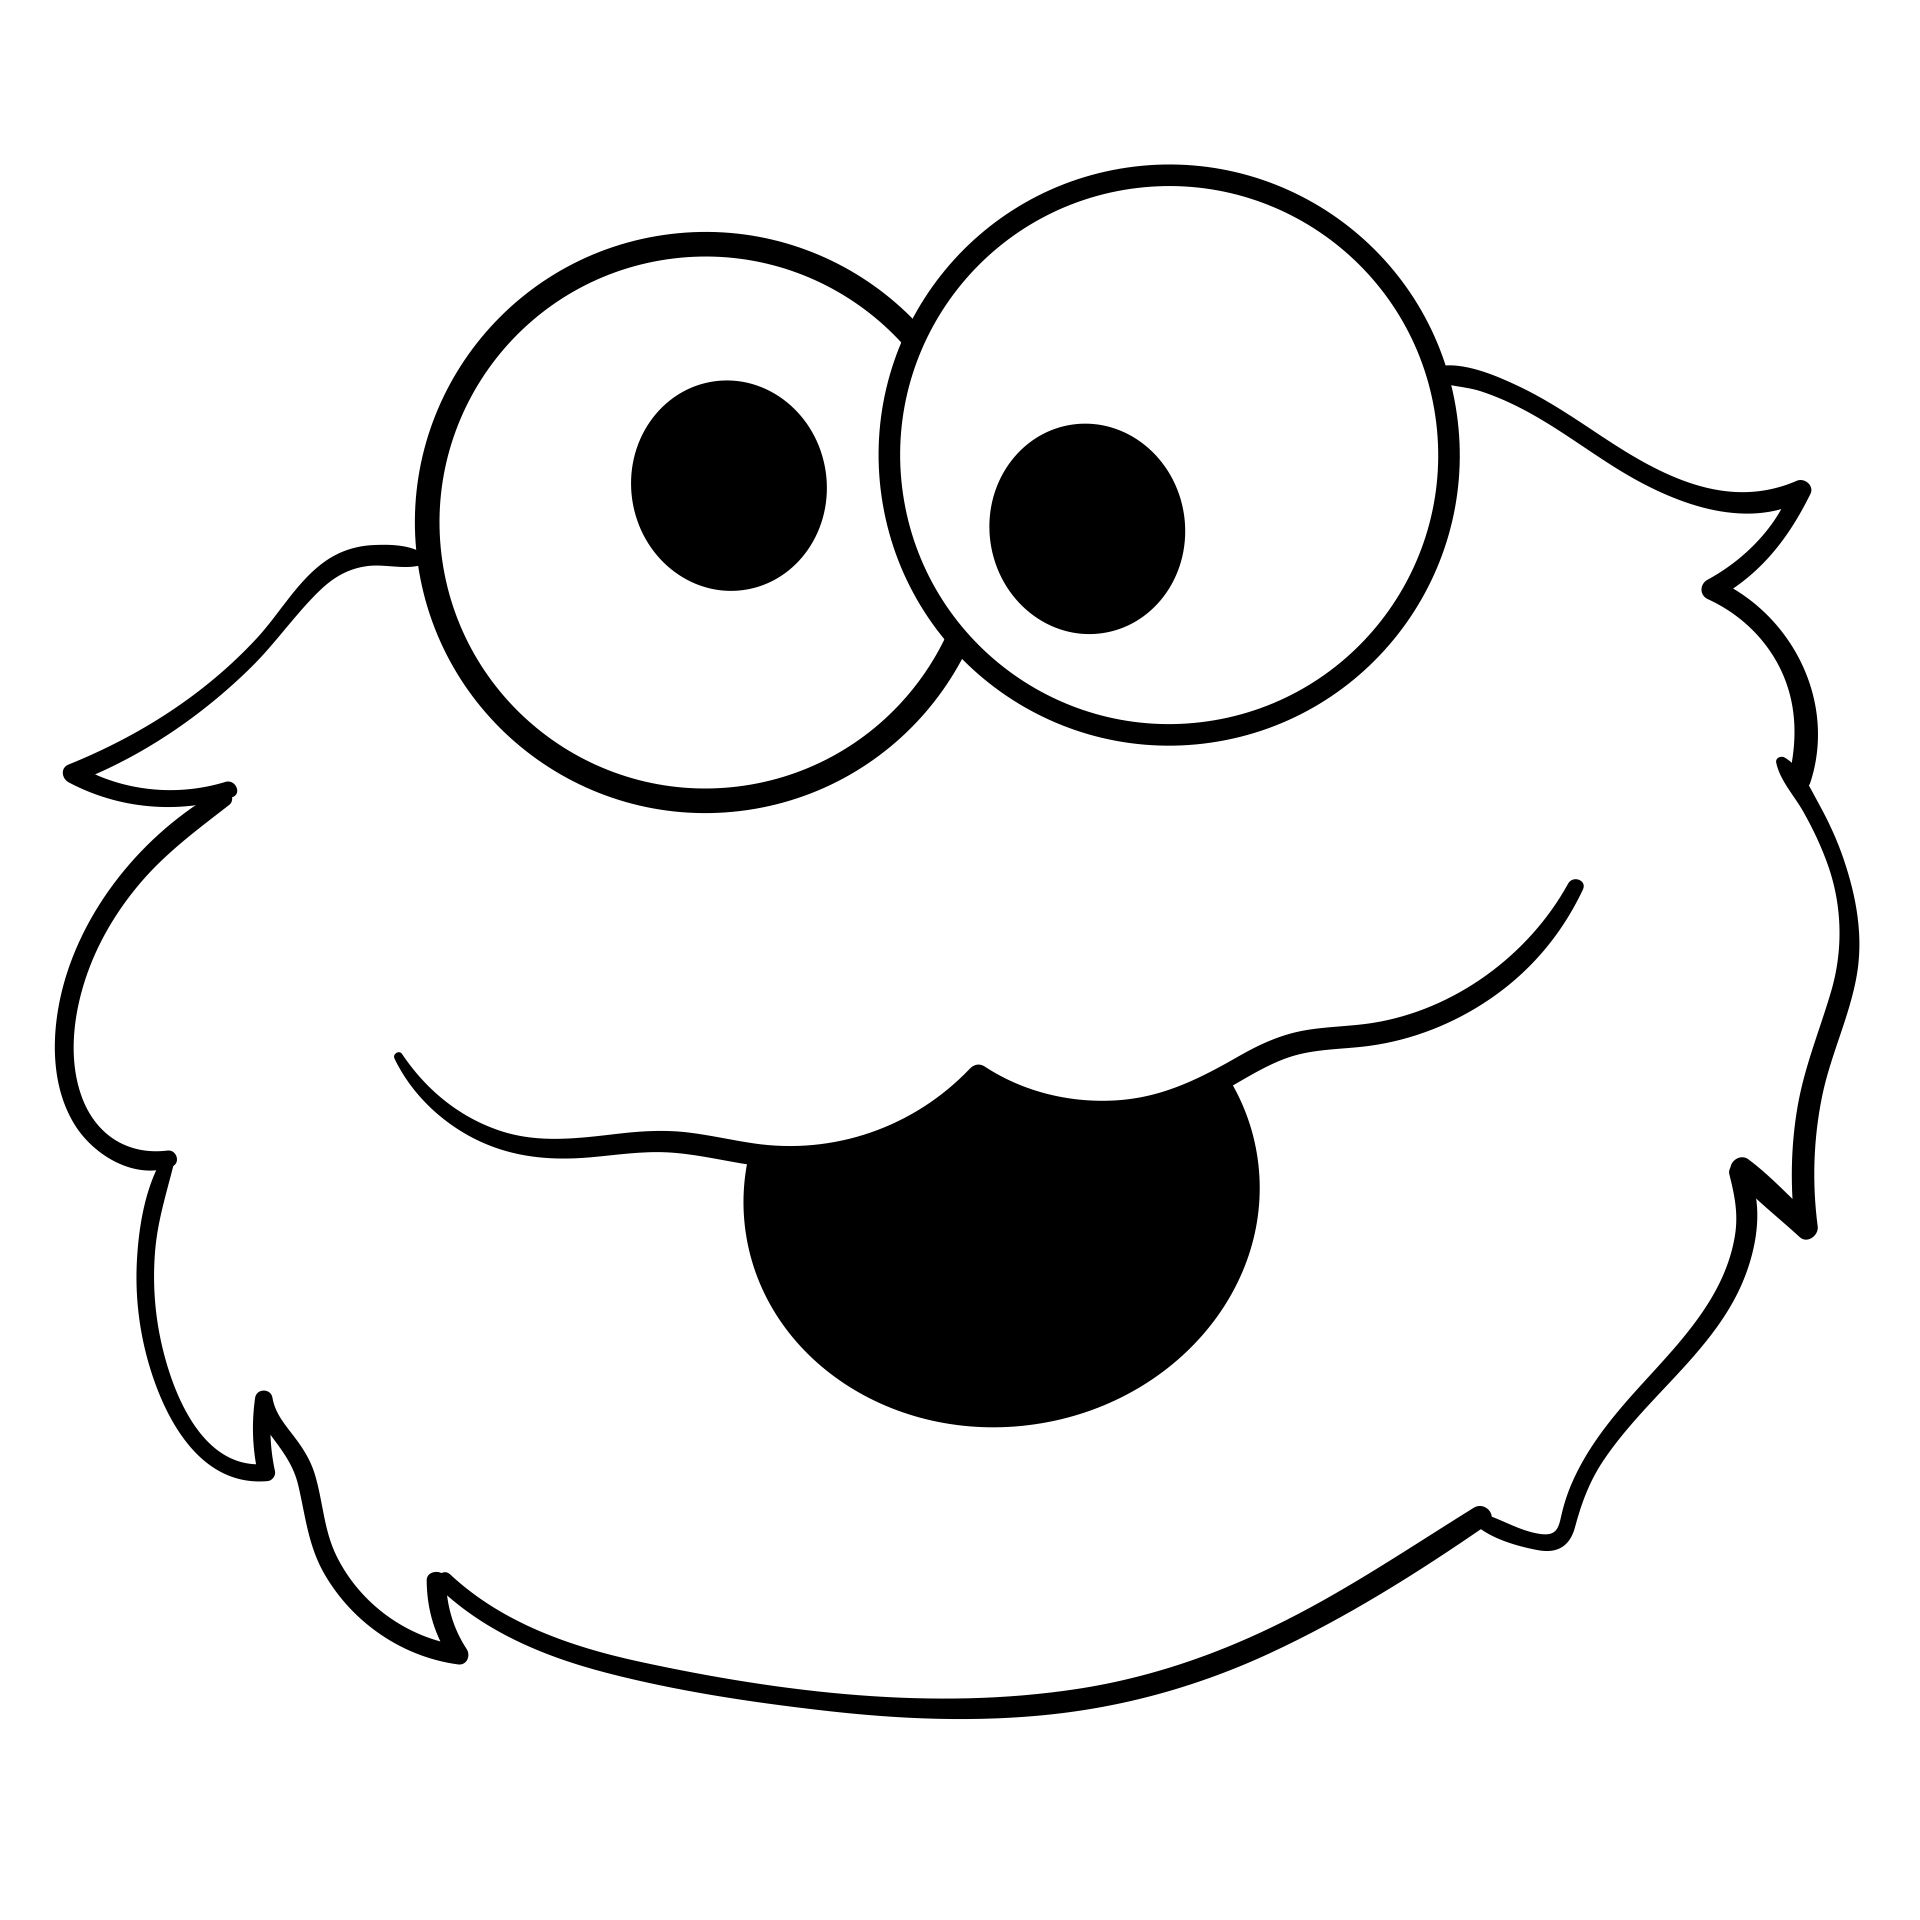 cookie-monster-face-template-printable-free-printable-templates